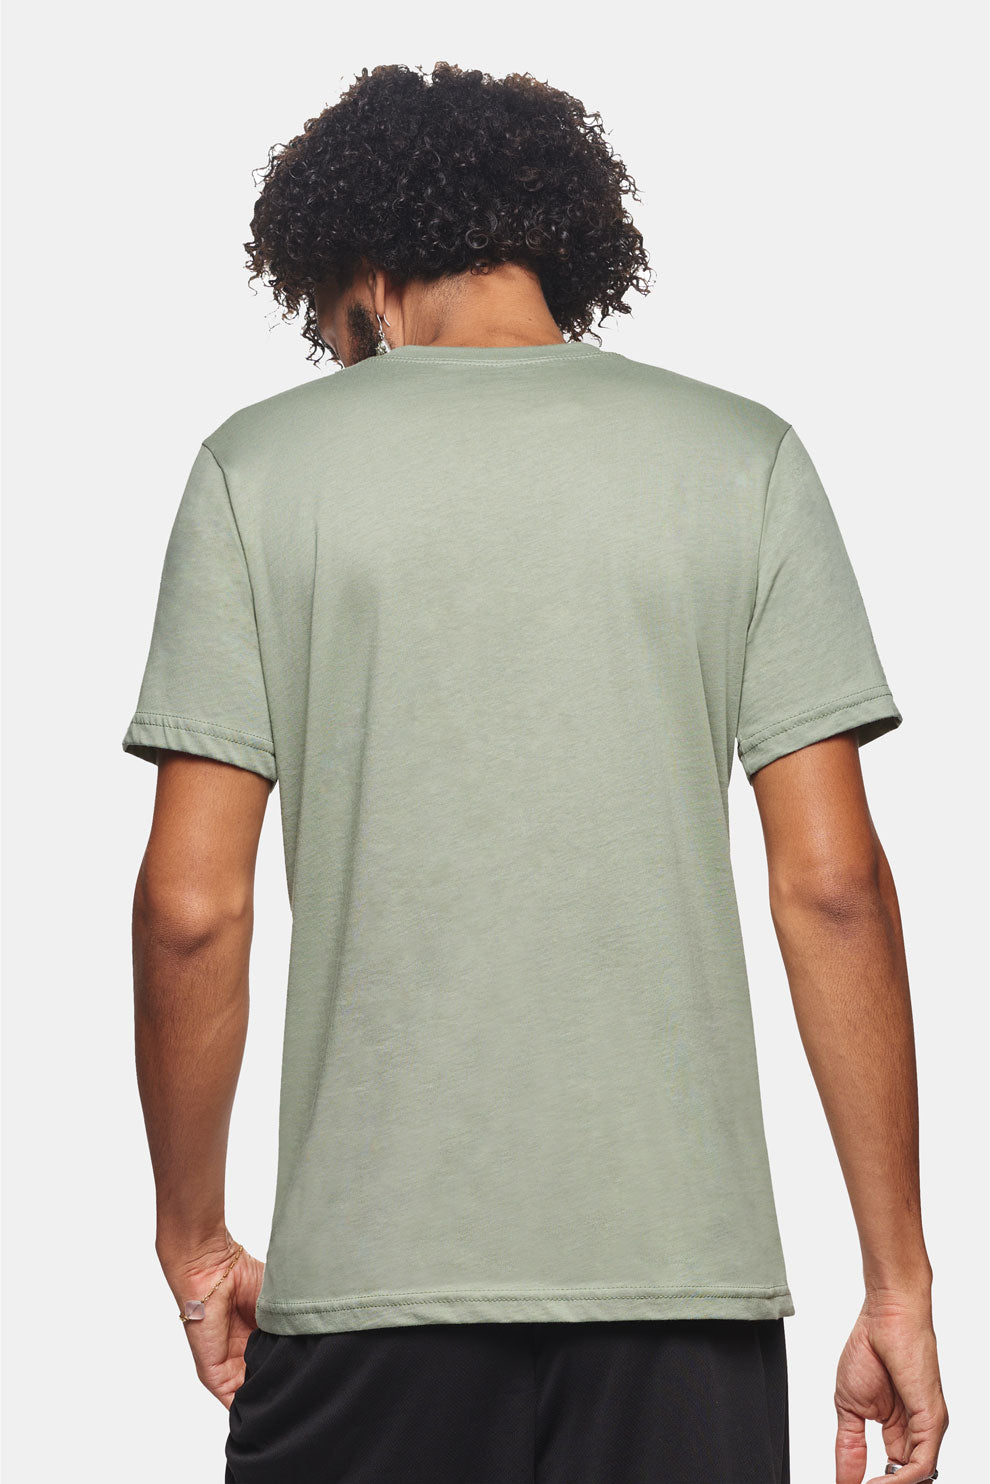 Expert Brand Apparel Unisex Organic Cotton Tee Made in USA in sage 3#color_sage